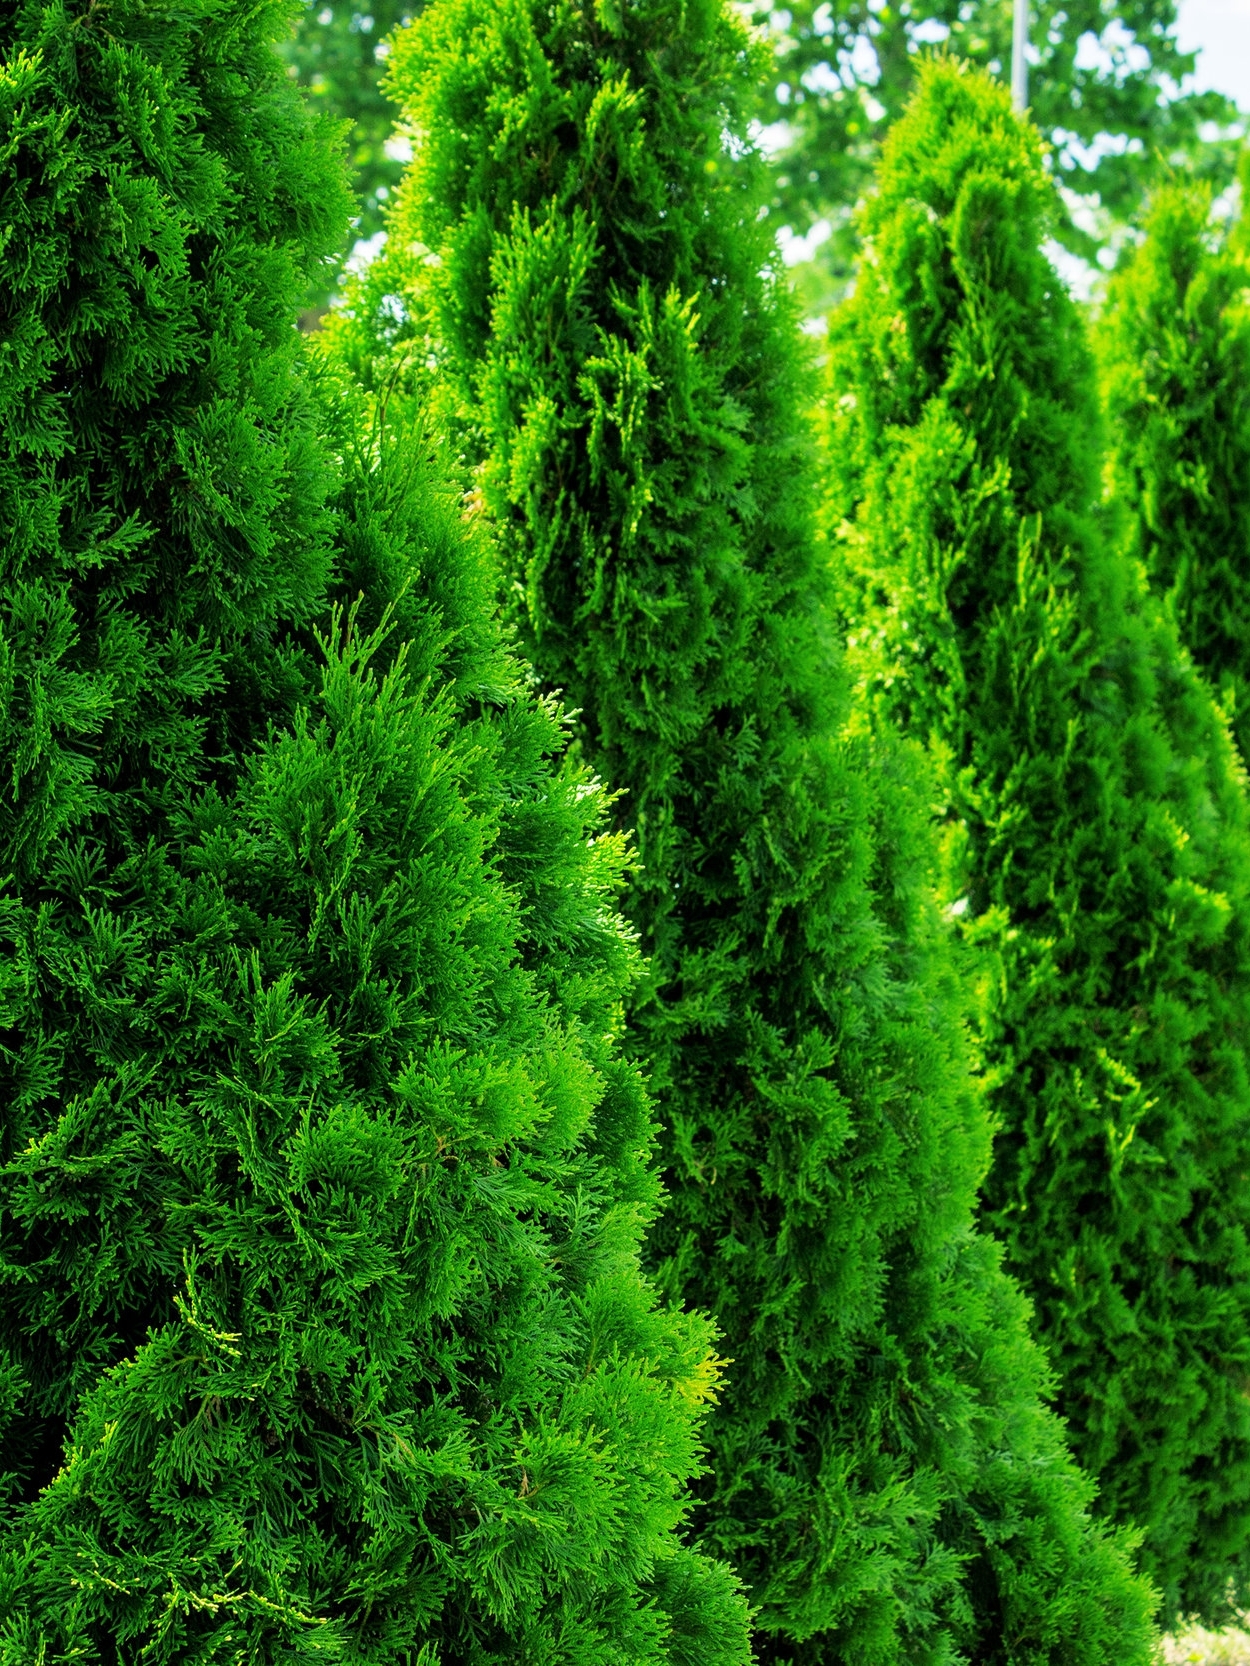 5 trees for screening; Thuja (aborvitae) - A substitute for Leyland Cypress, many people cannot tell the the Leyland from the 'Green Giant' arborvitae. 'Green Giant' or 'Emerald Green' is a better fit in smaller landscapes.Zone: 5-8Size: 30'-40' x 15'-20, or more narrow varieties 10'-12' x 3'Cultivars suggested: 'Green Giant', 'Emerald Green', 'Yellow Ribbon'Culture: Full sun to part shadeGrowth rate: Medium to FastPests and Disease: No serious issue, sometimes scale or bagworms*'Green Giant' pictured